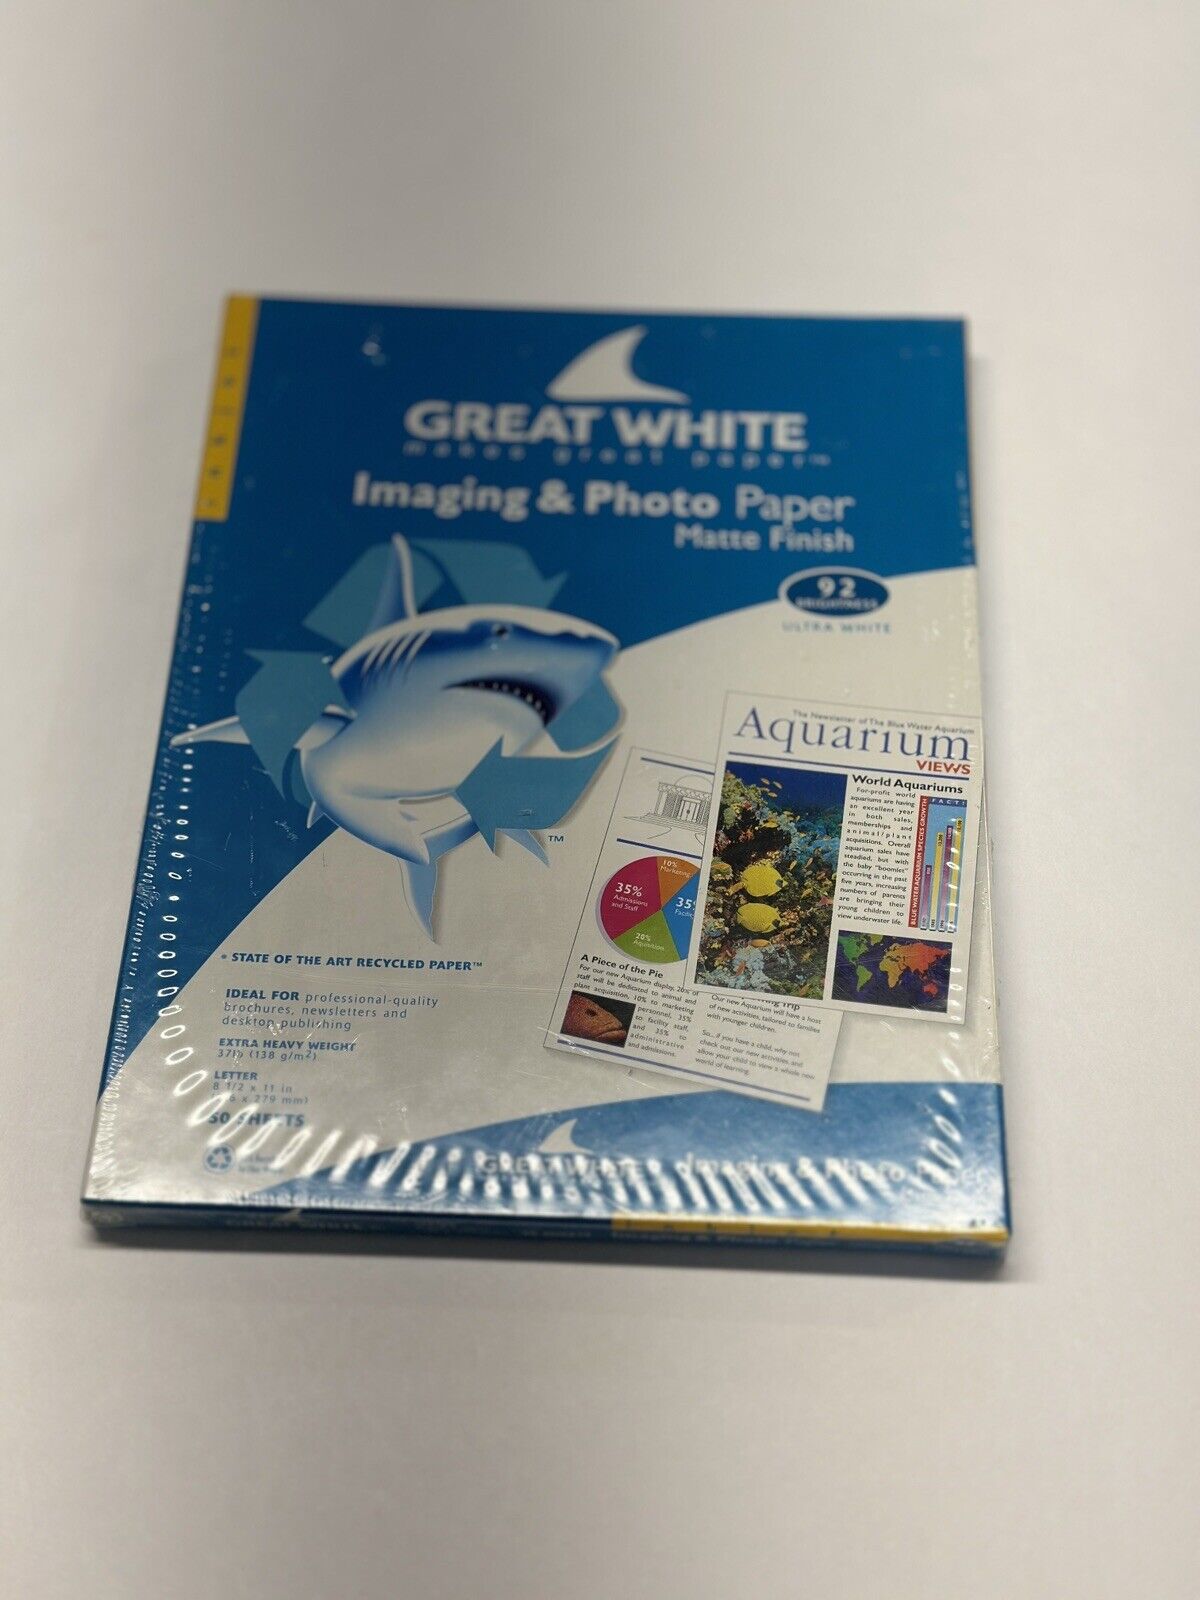 Great White Imaging & Photo Paper 8.5 x 11 Matte Finish Open Box Extra Heavy